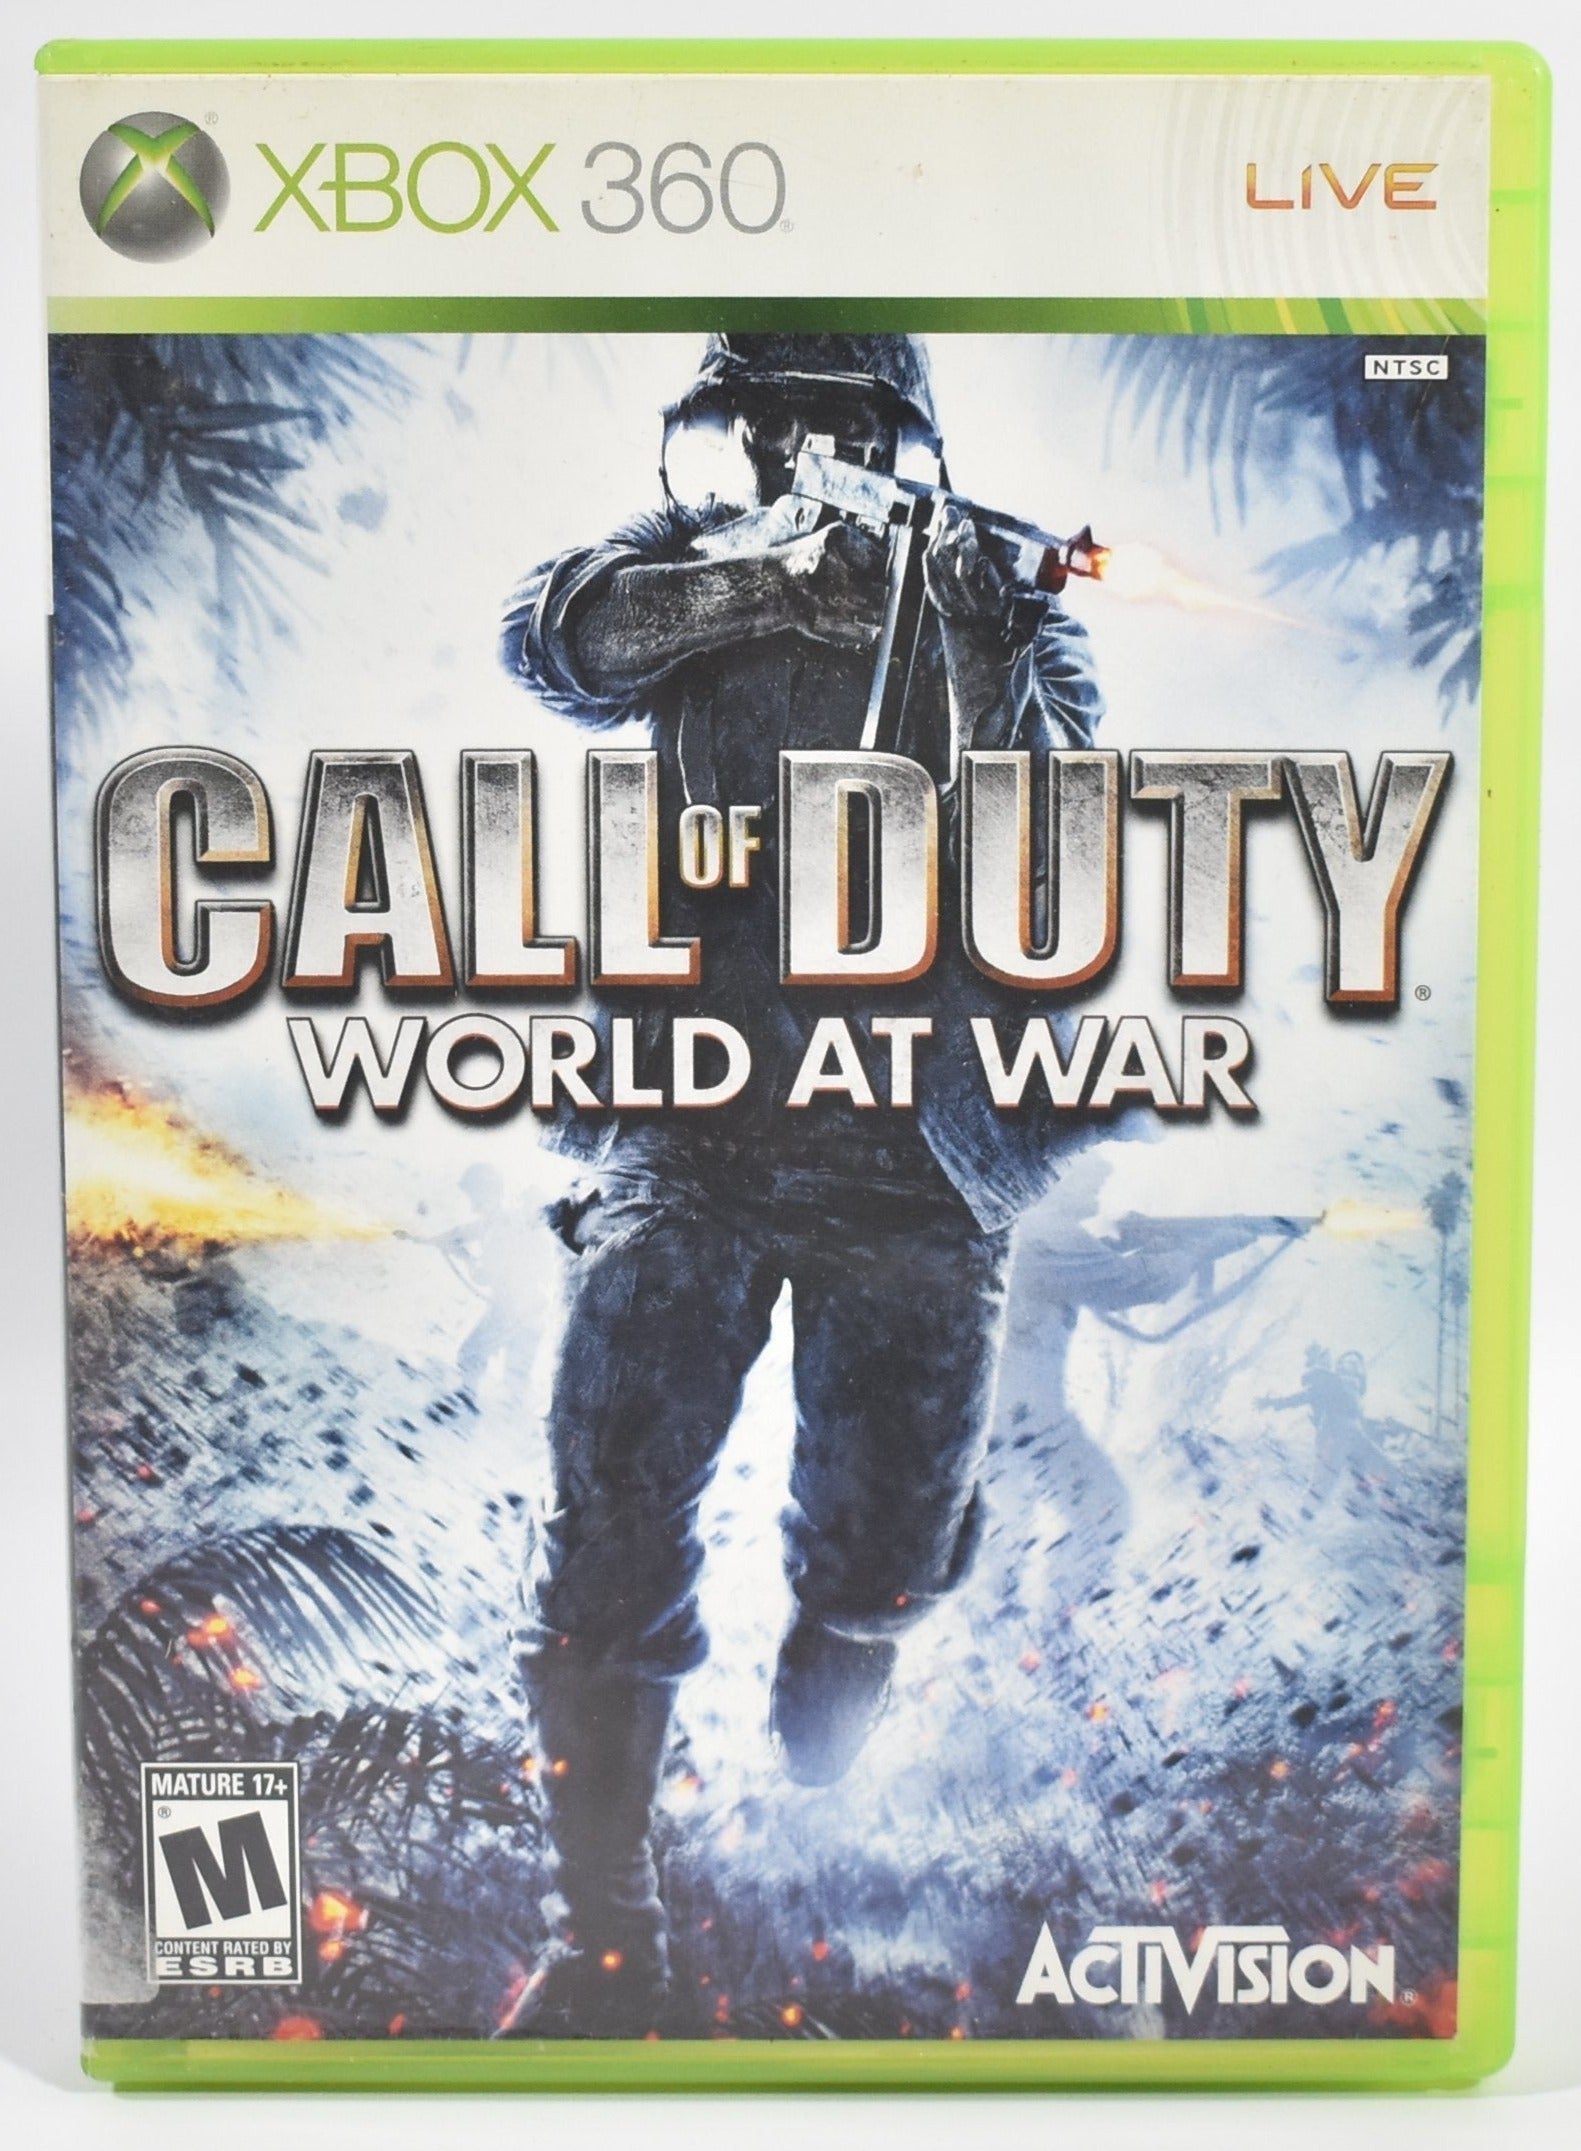 Xbox 360 Video Game Call of duty world at war USED